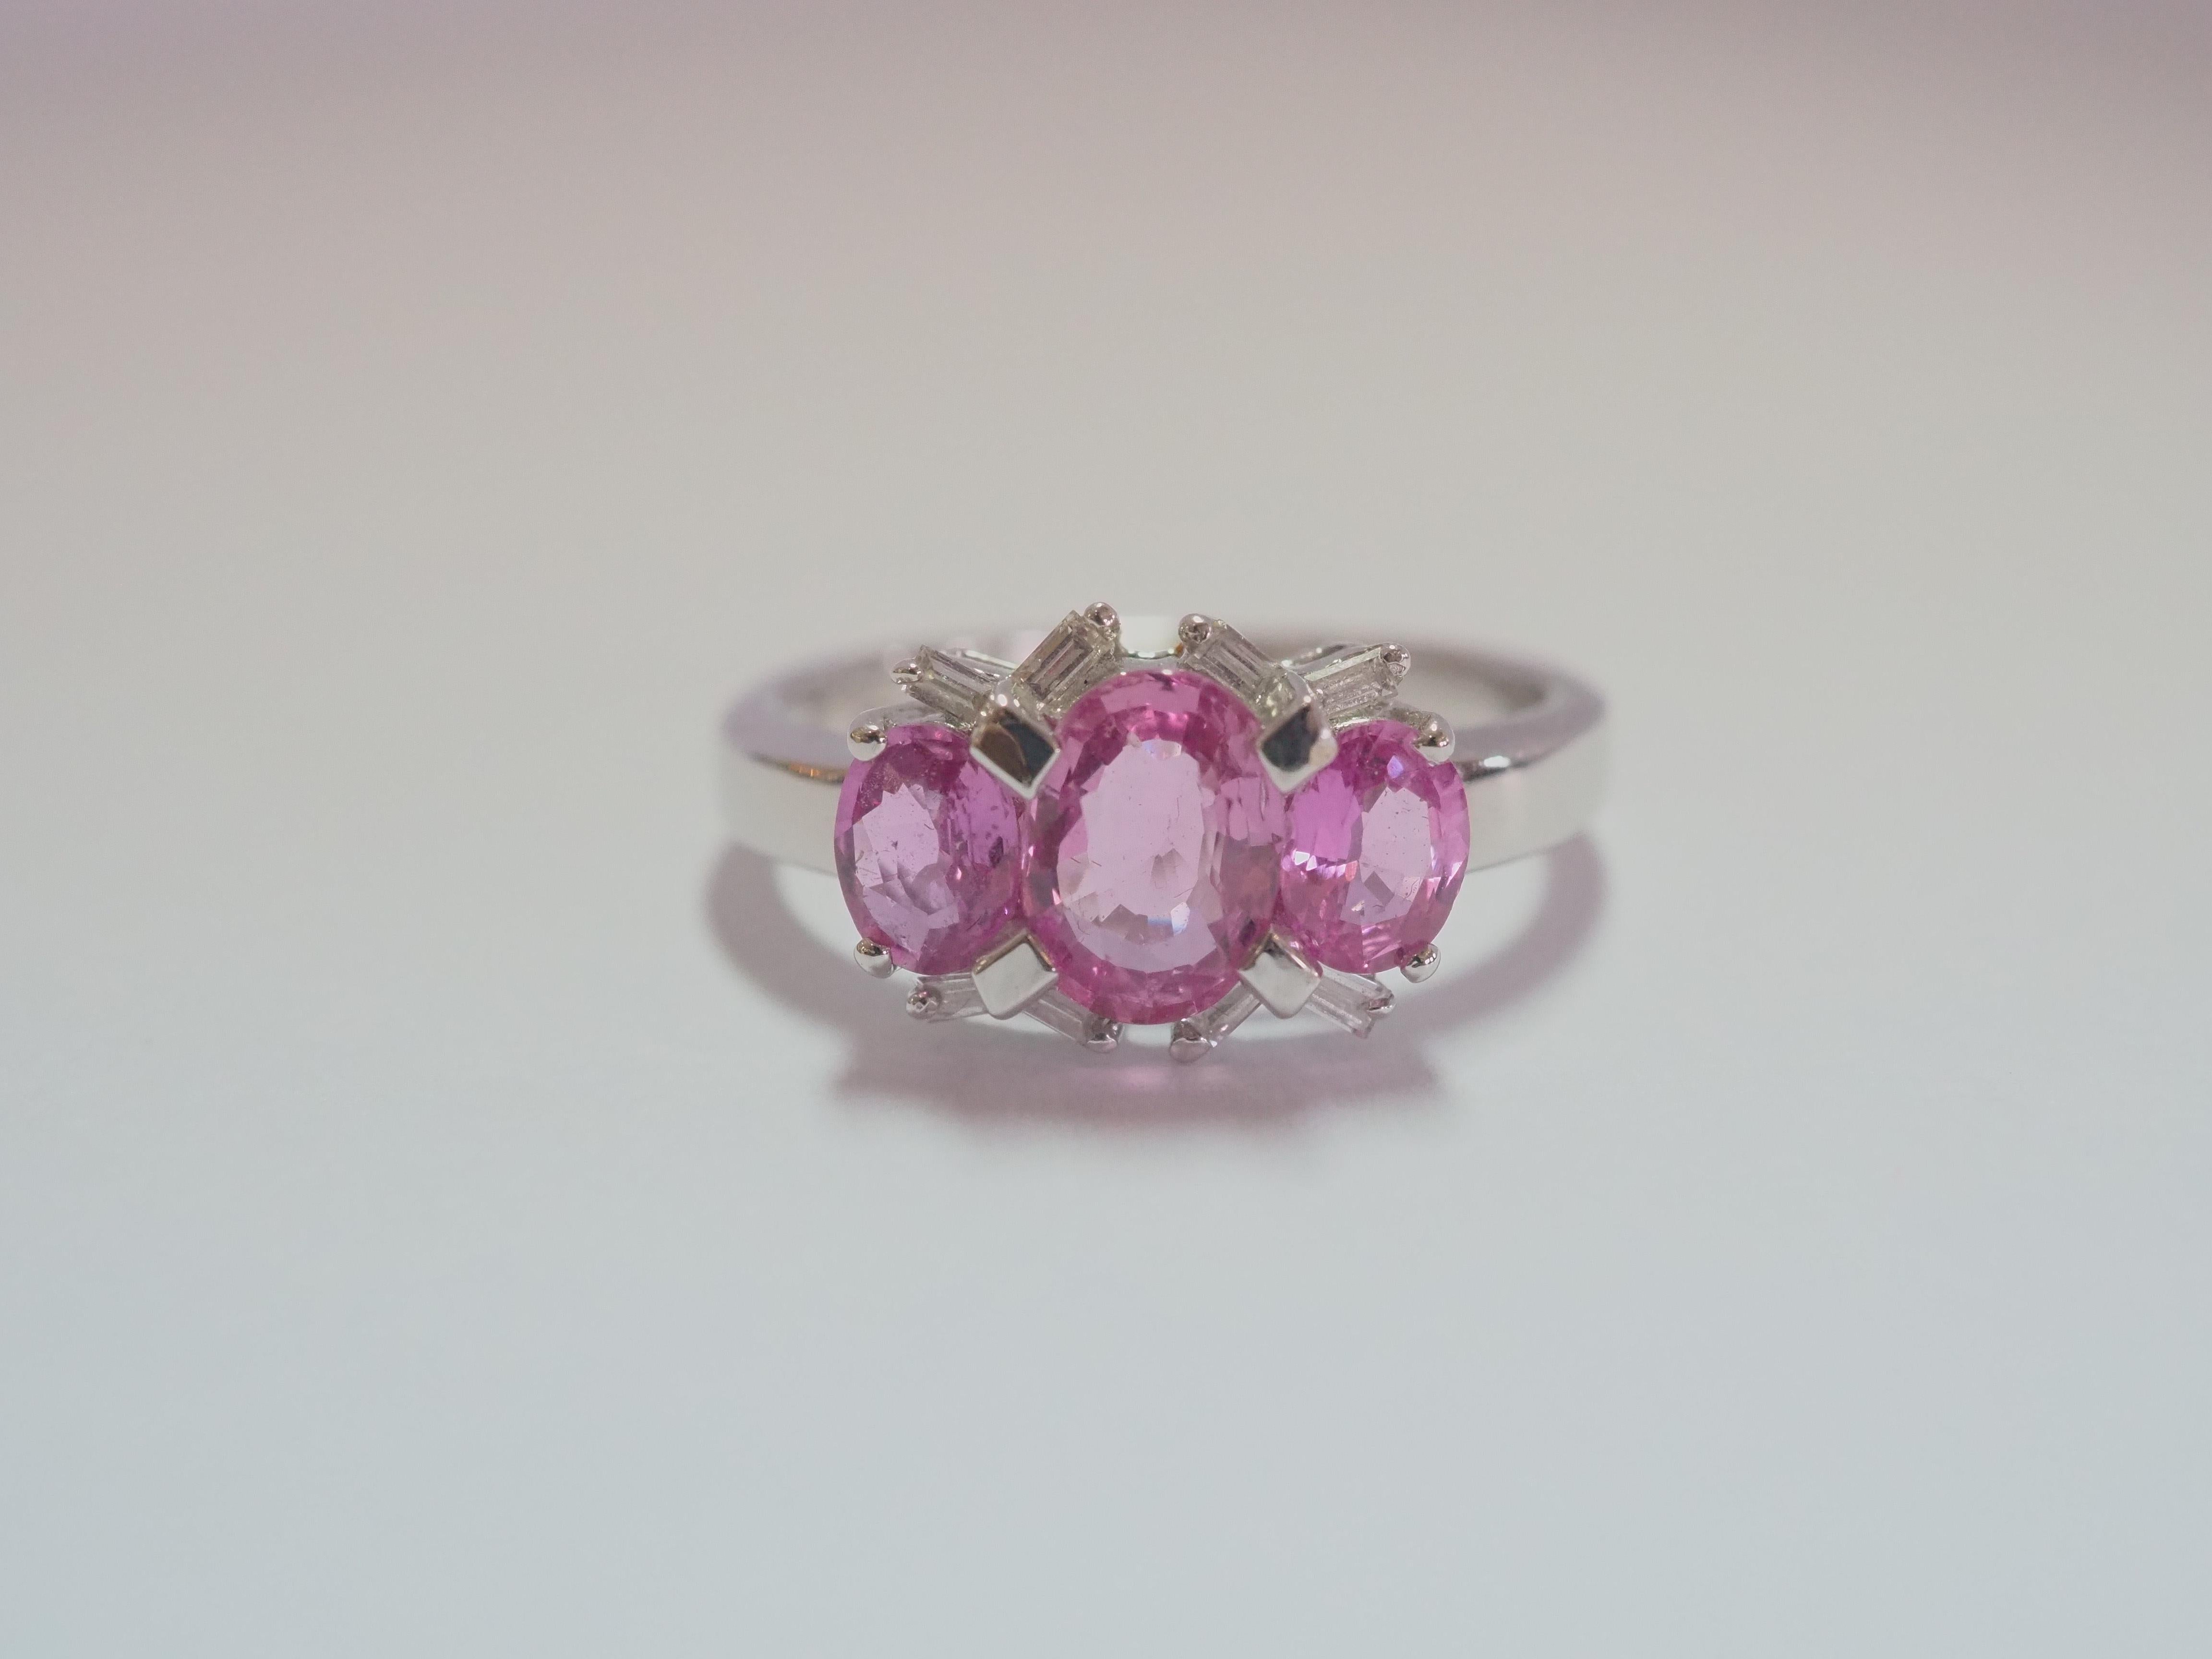 This quality and beautiful engagement piece is an 18K white gold fine quality pink sapphire and diamond ring. 3 bubblegum oval pink sapphires are set meticulously and at the center is the largest one. There are 8 of baguette cut diamonds at decent